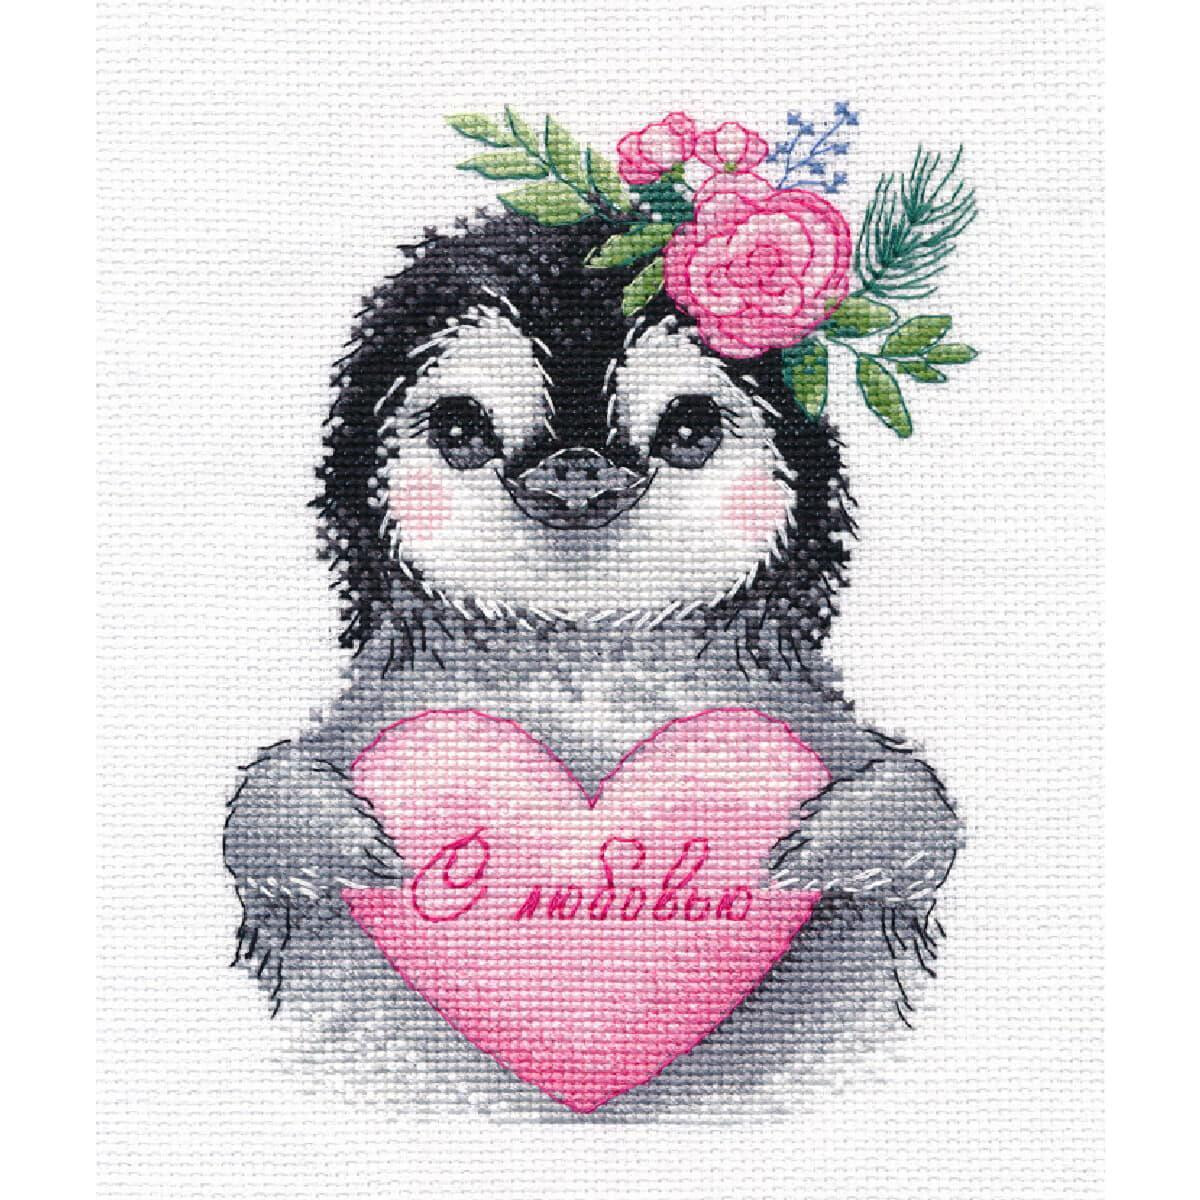 Oven counted cross stitch kit "From the heart",...